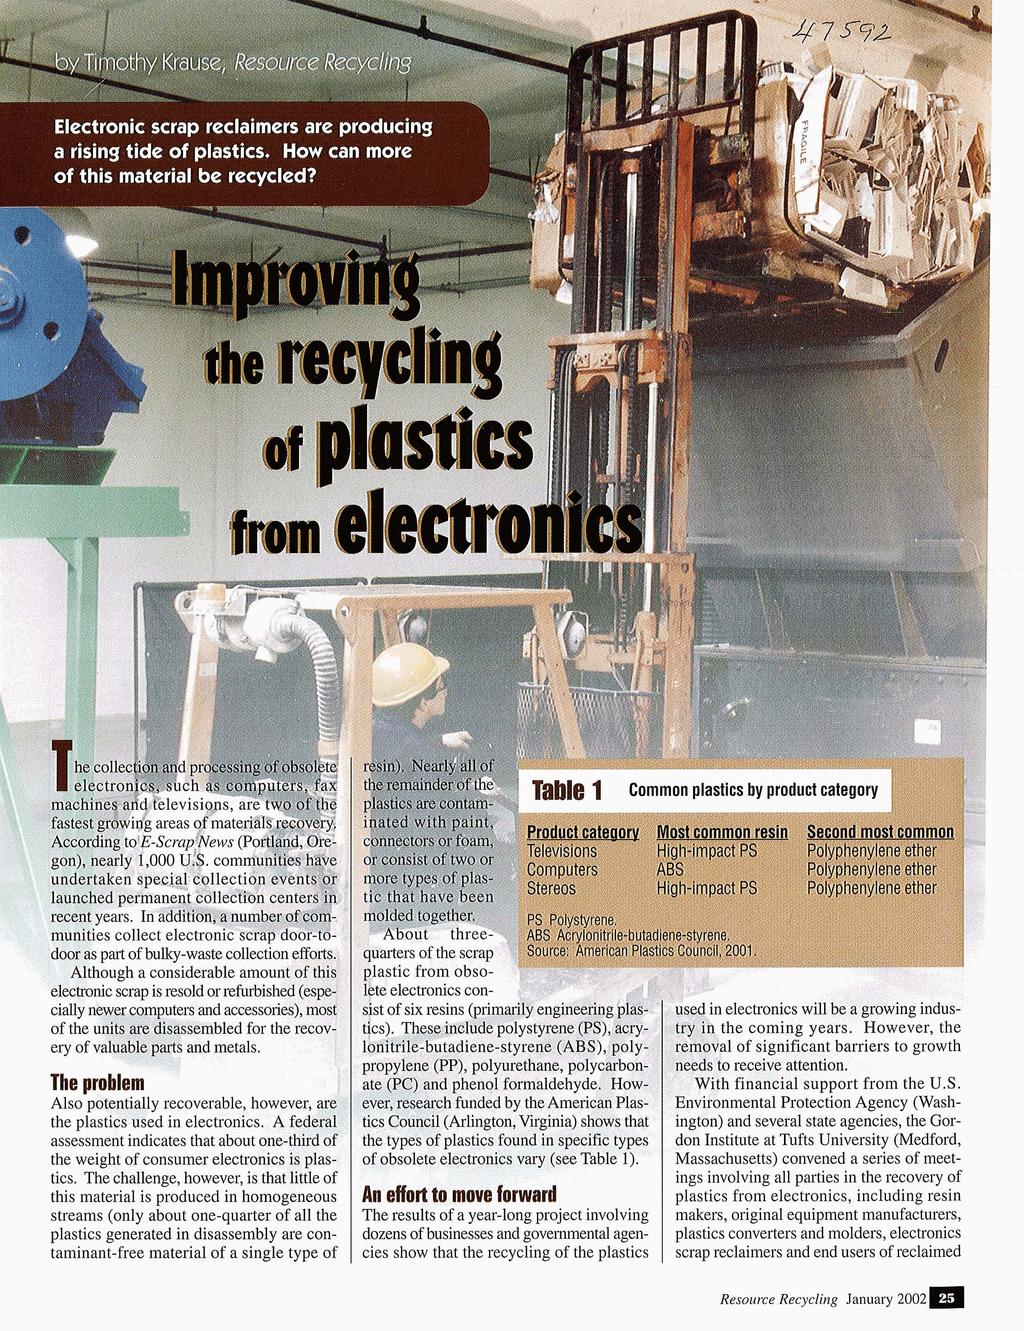 Electronic scrap reclaimers are producing a rising tide of plastics. How can more of this material be recvcled?